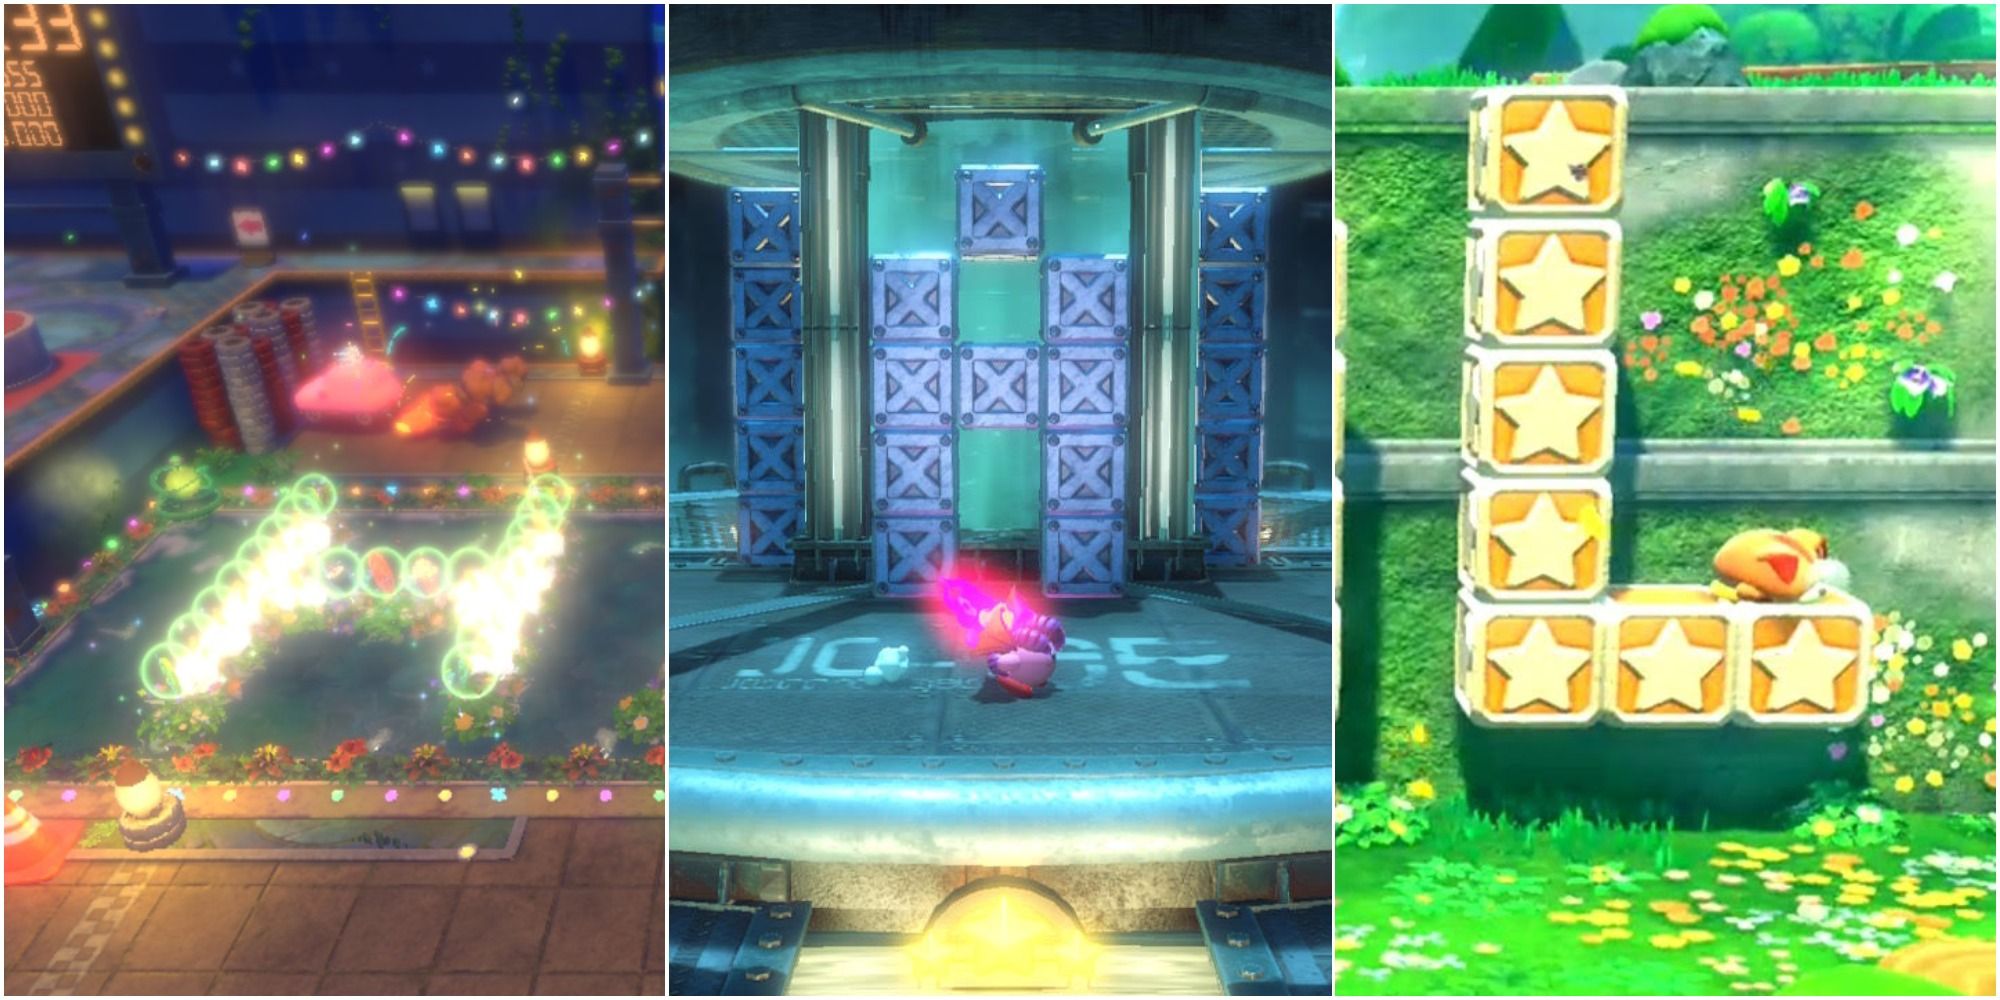 Kirby and the Forgotten Land: All Blueprint Locations